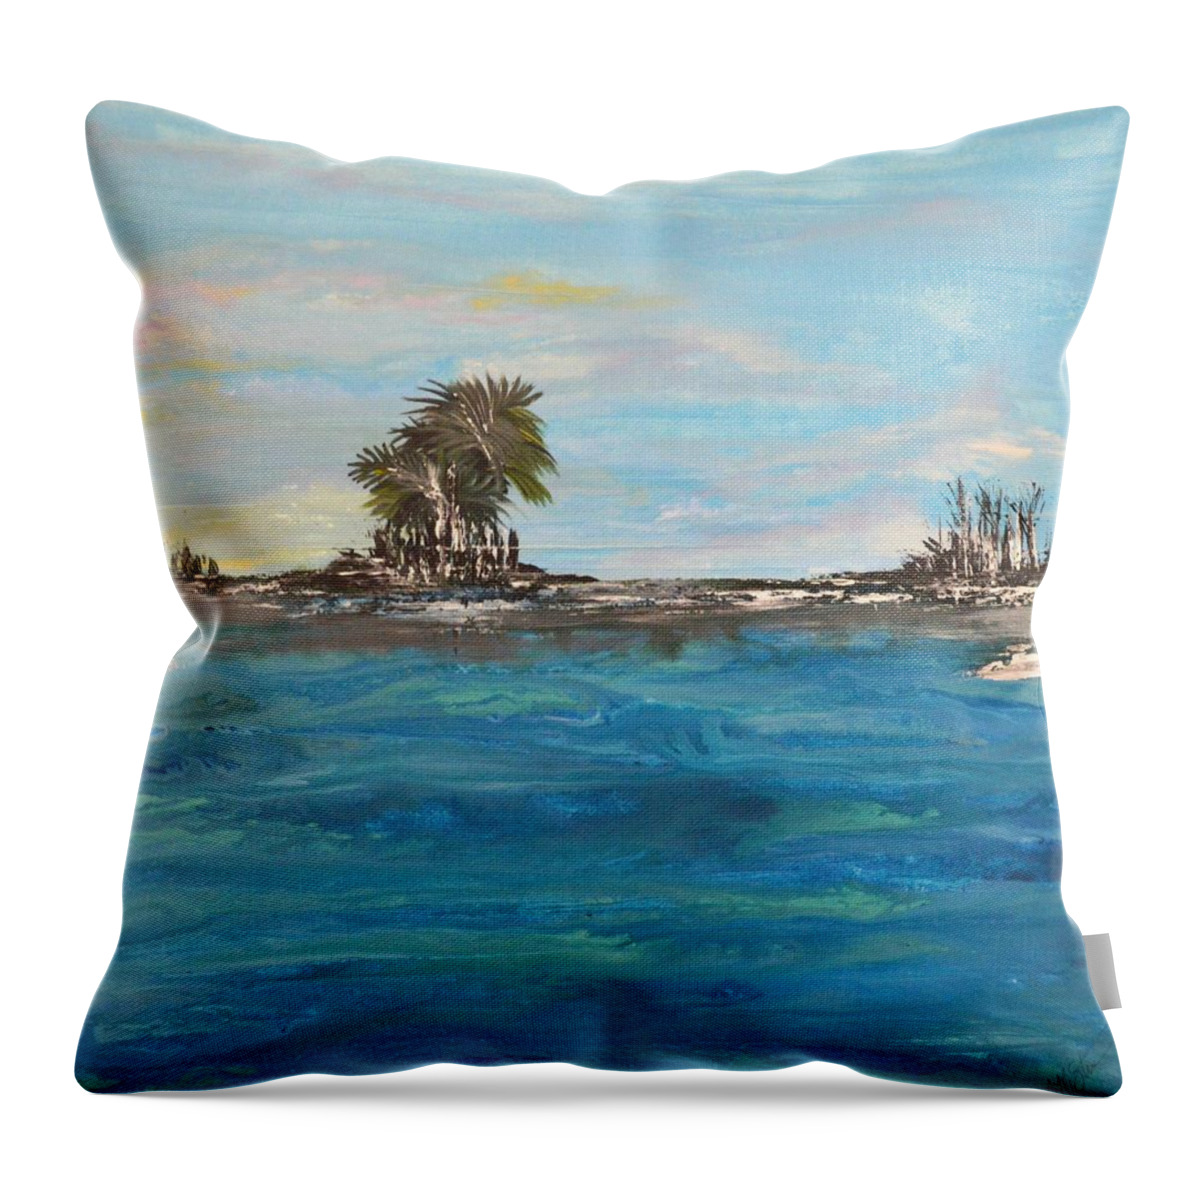  Throw Pillow featuring the painting Backbay No. 404 by MiMi Stirn